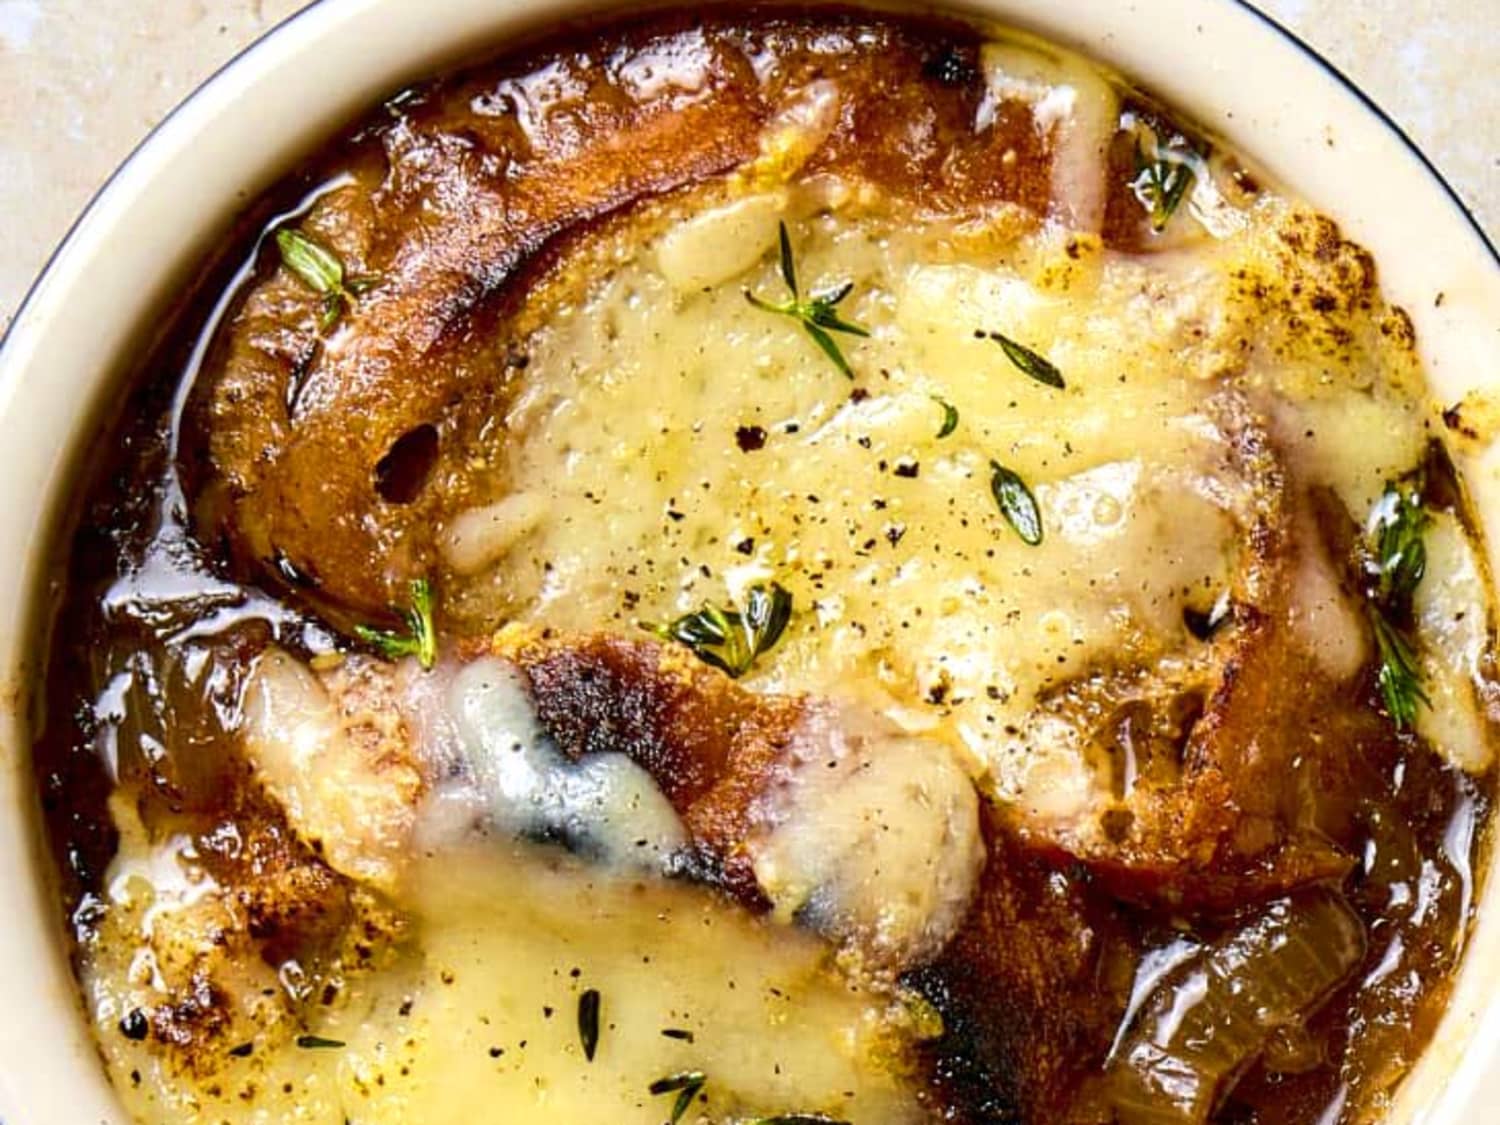 Classic French Onion Soup Recipe (The Best!)